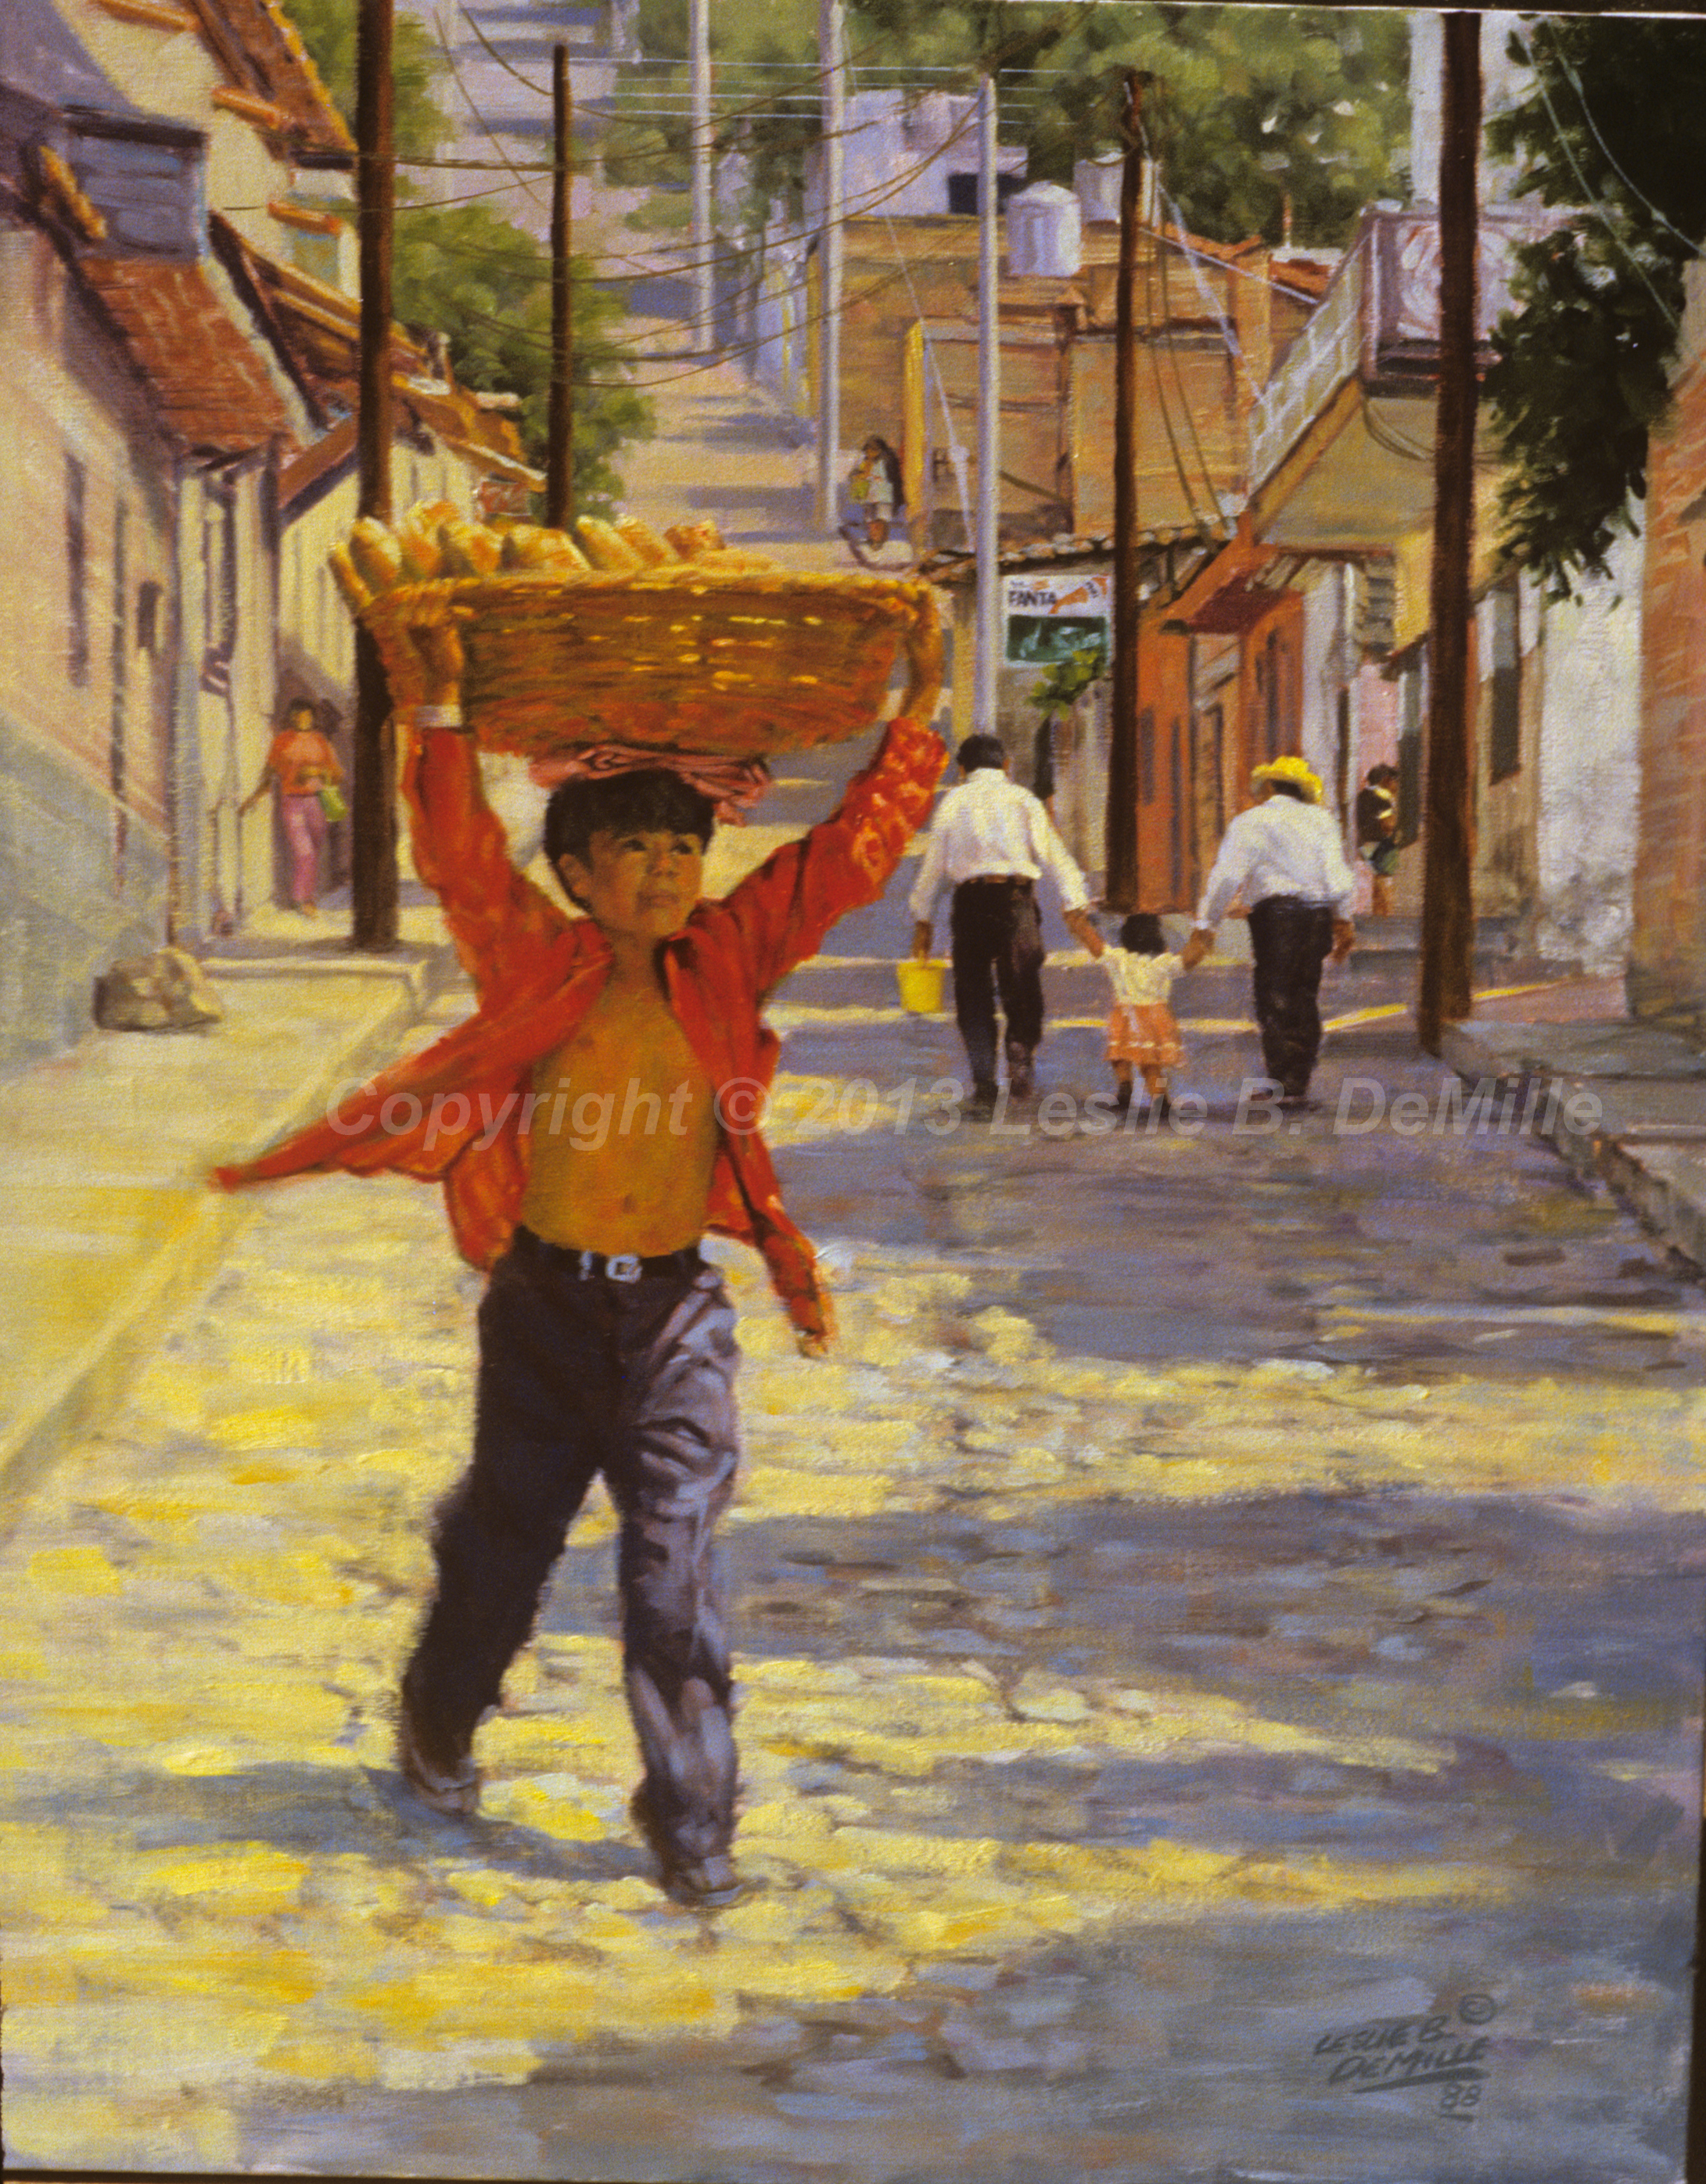 Bread Basket Delivery, Oil 1988 (11x14)